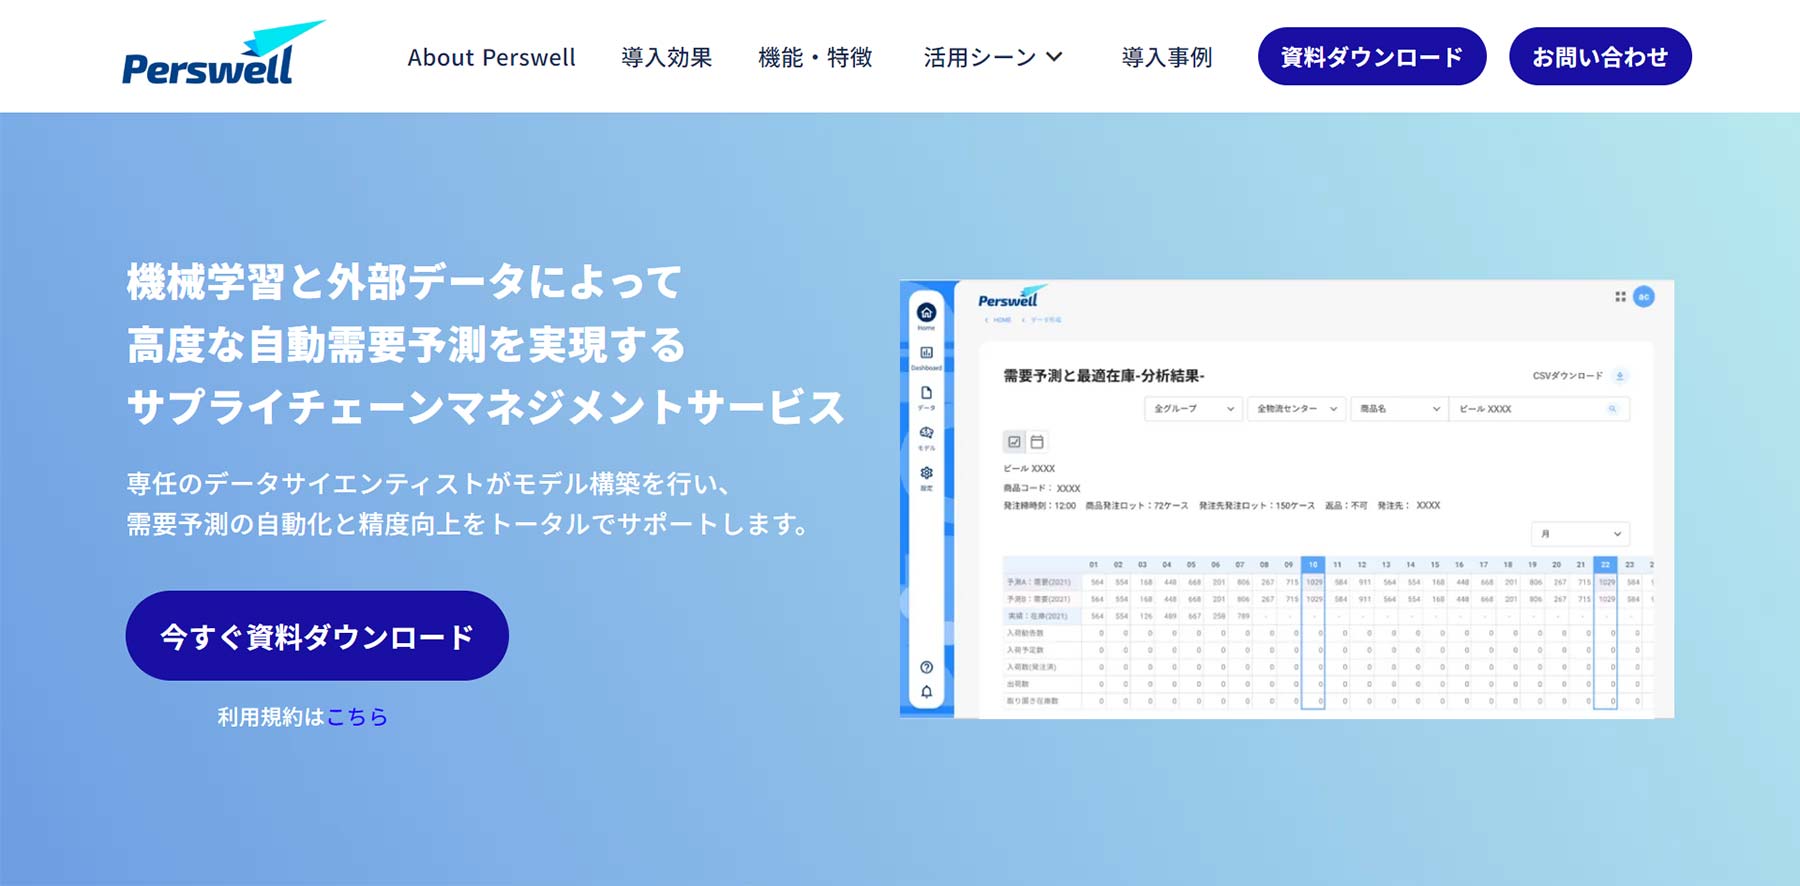 Perswell公式Webサイト